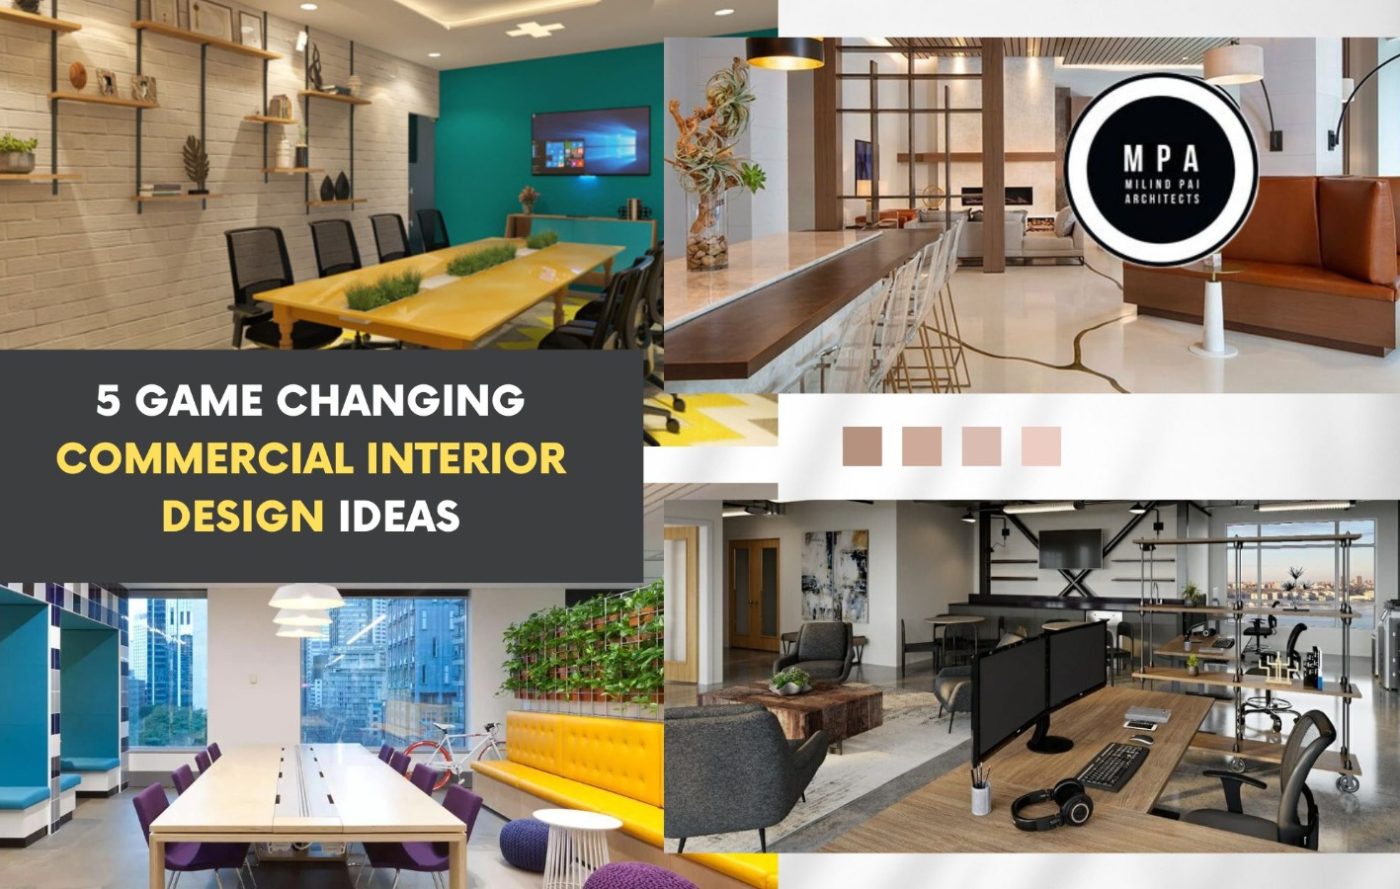 5 Game Changing Commercial Interior Design Ideas